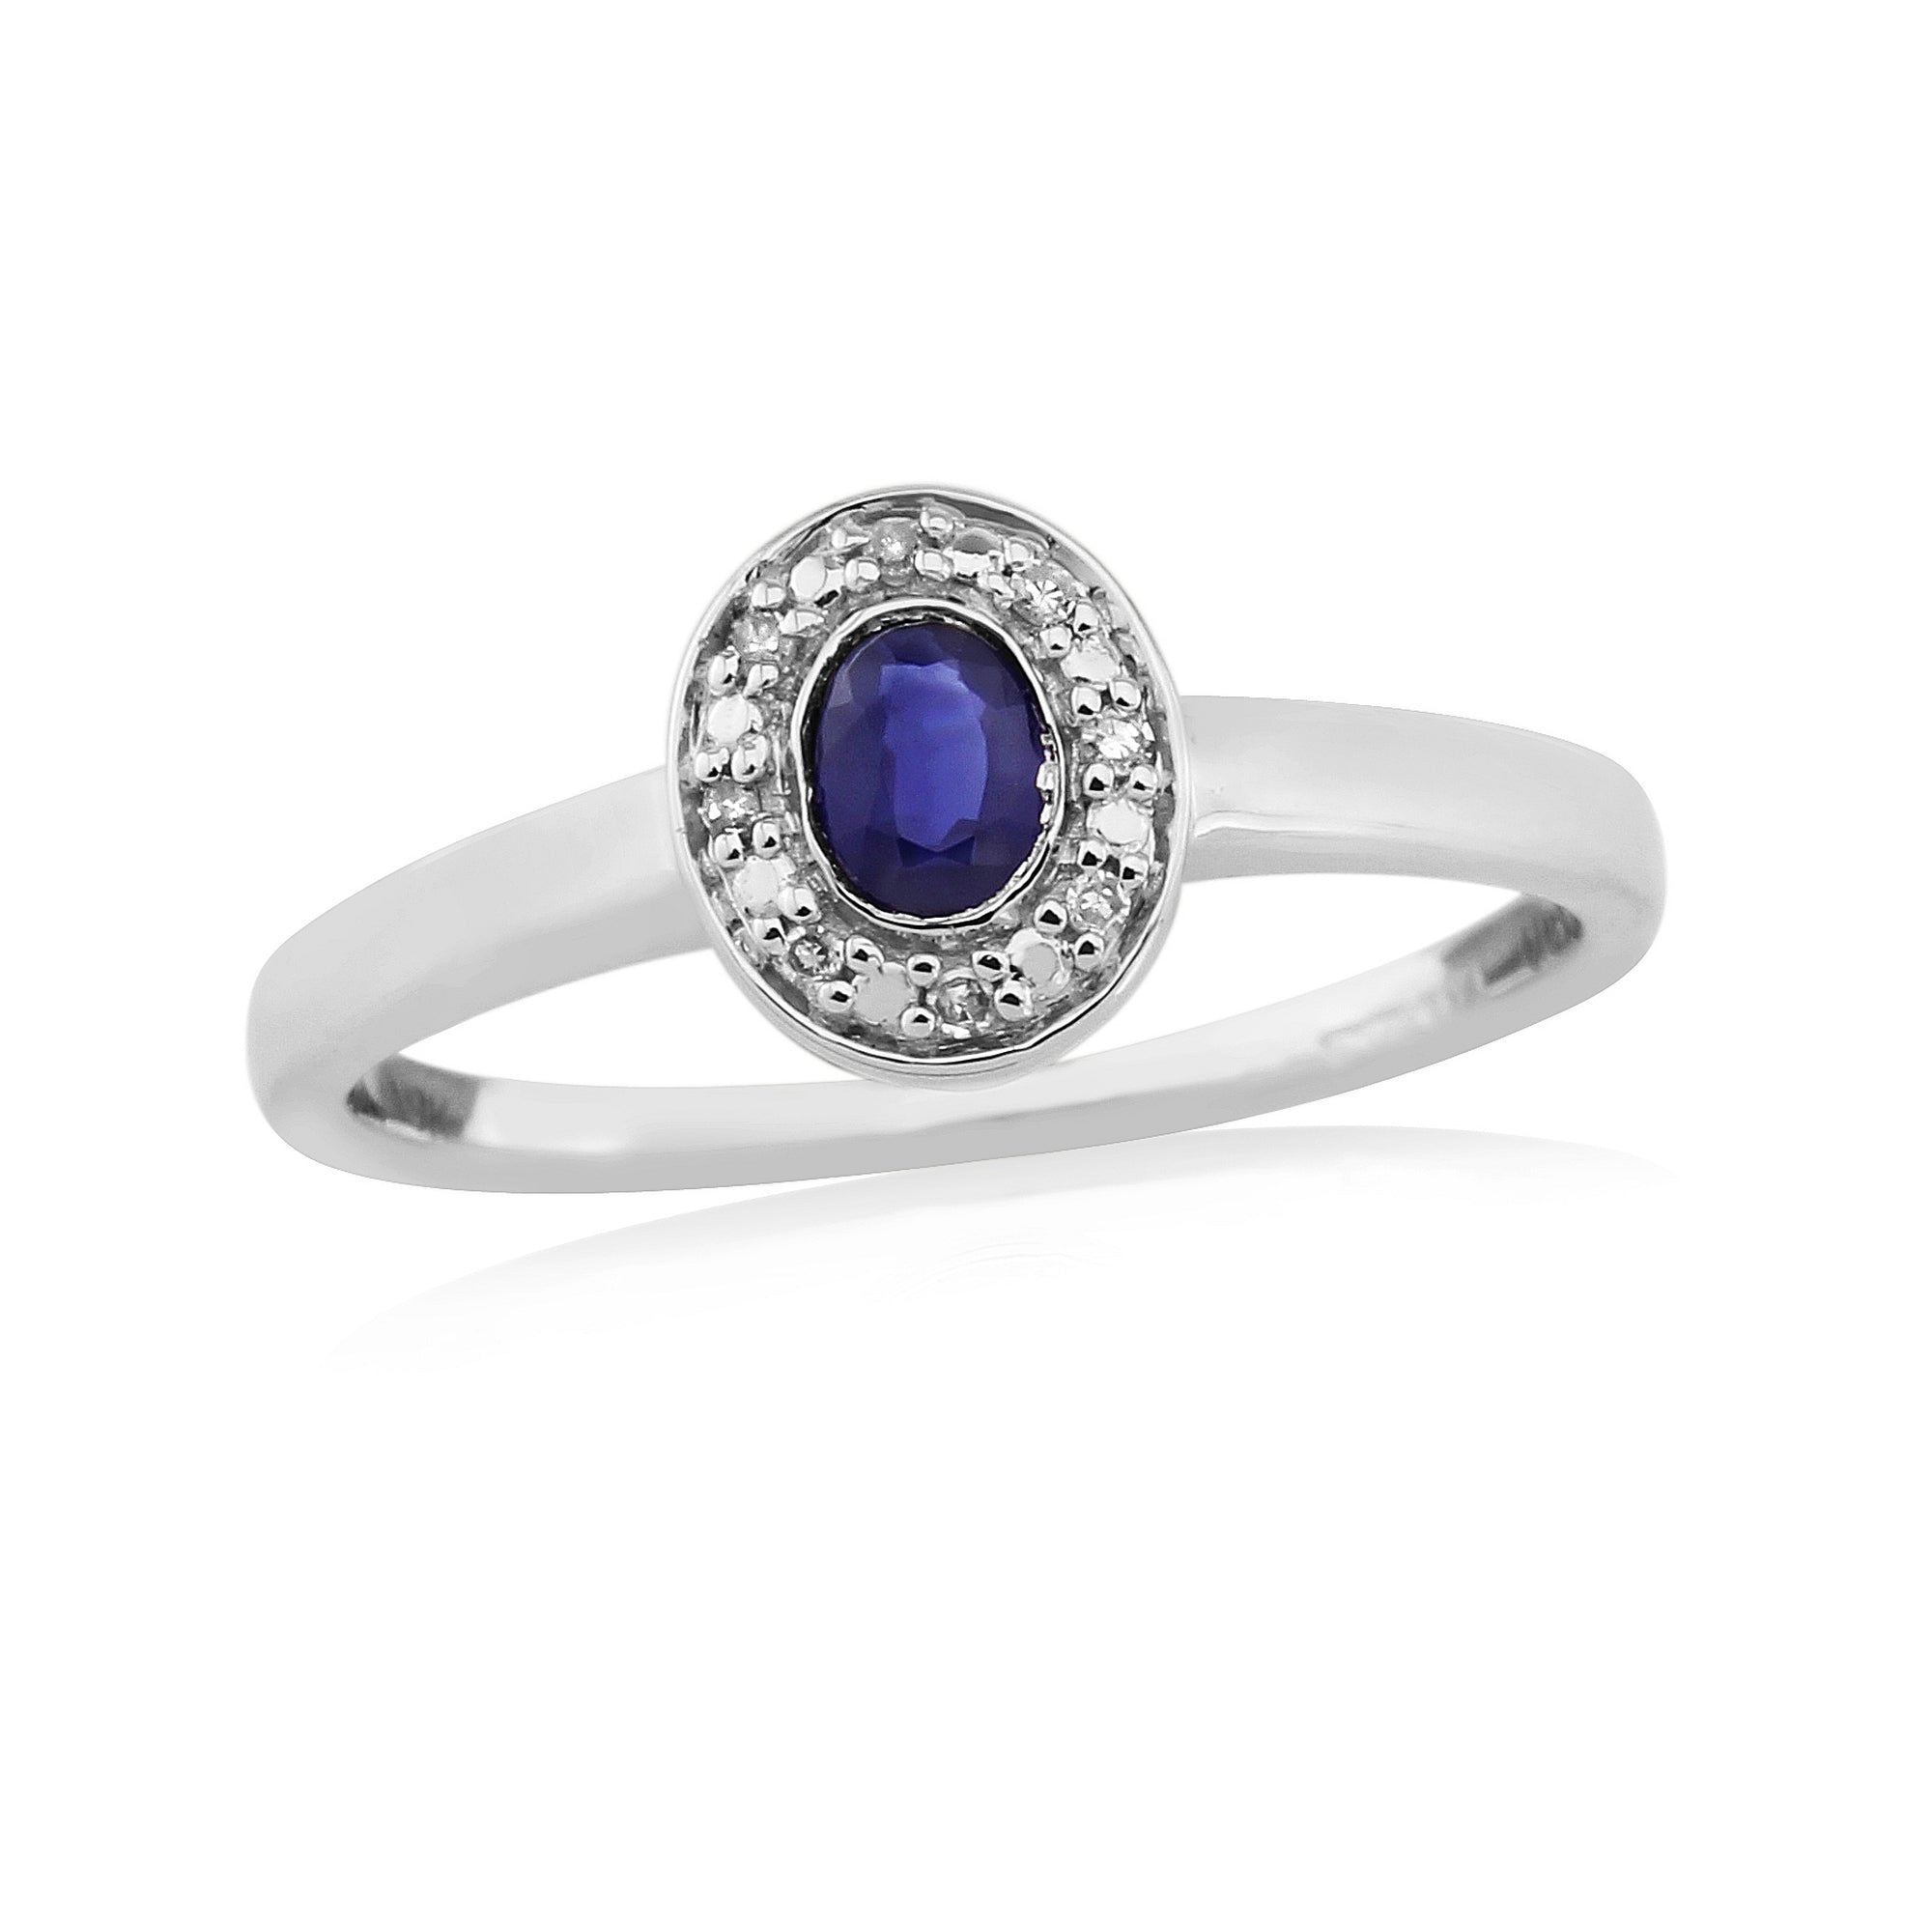 9ct white gold 4x3mm oval sapphire & diamond cluster ring 0.03ct